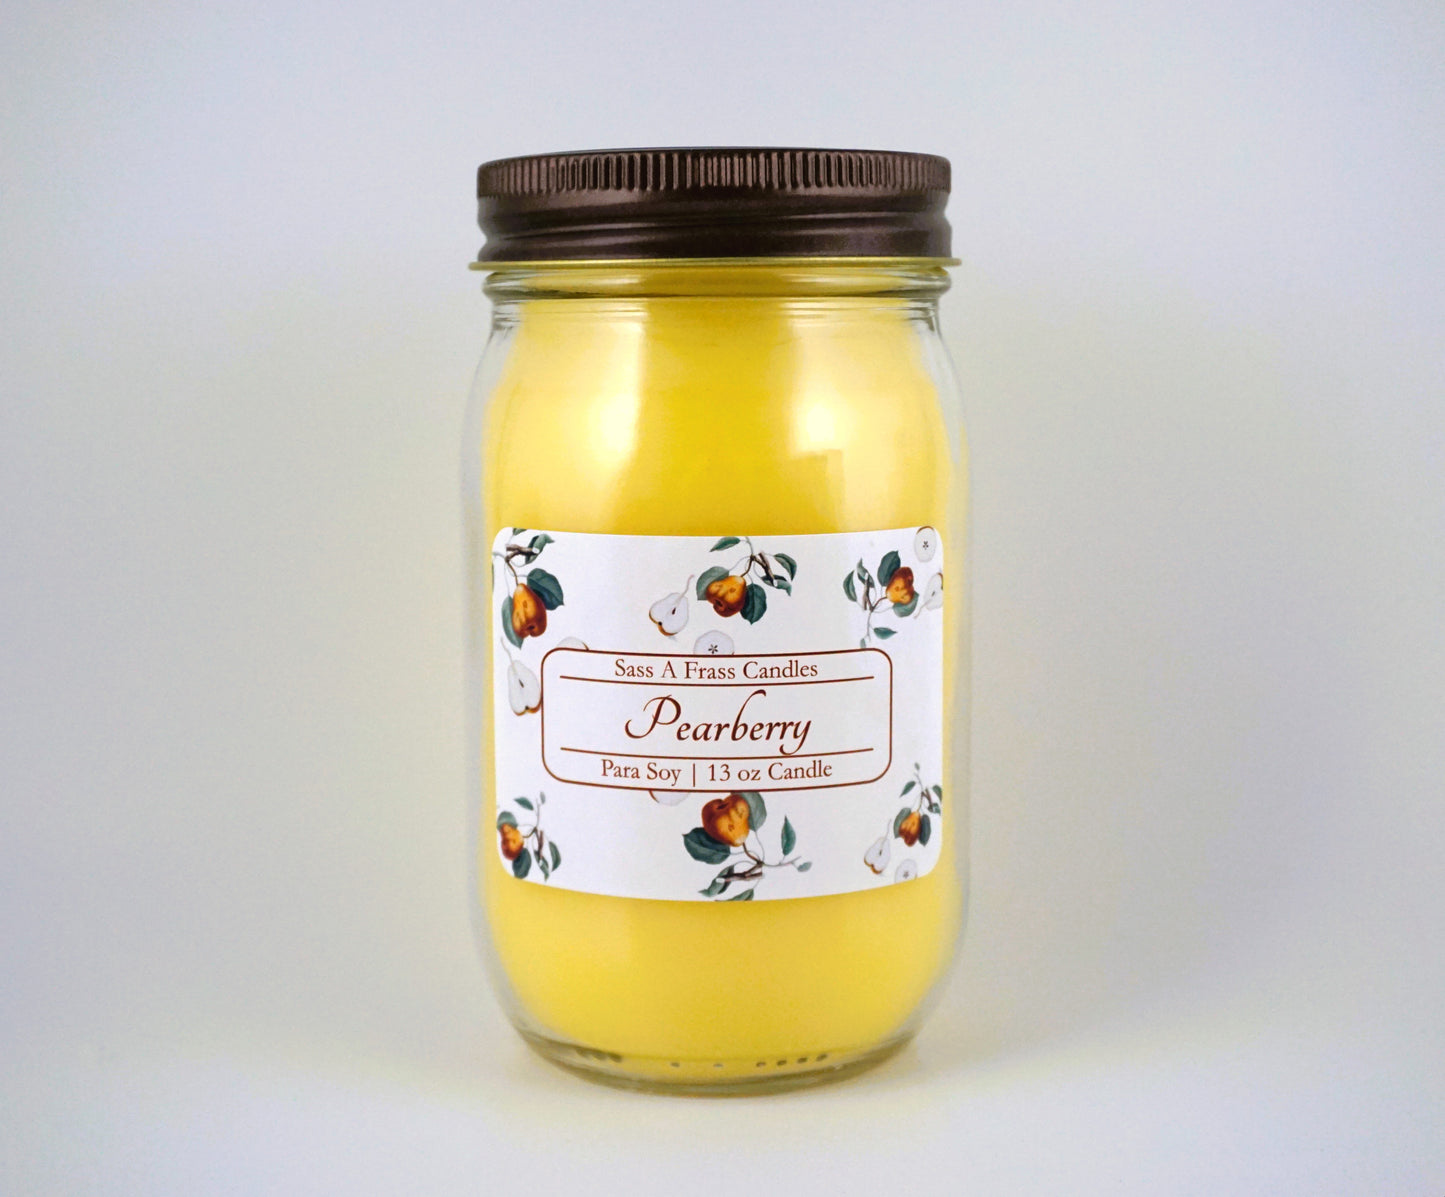 Pearberry 13 oz Candle